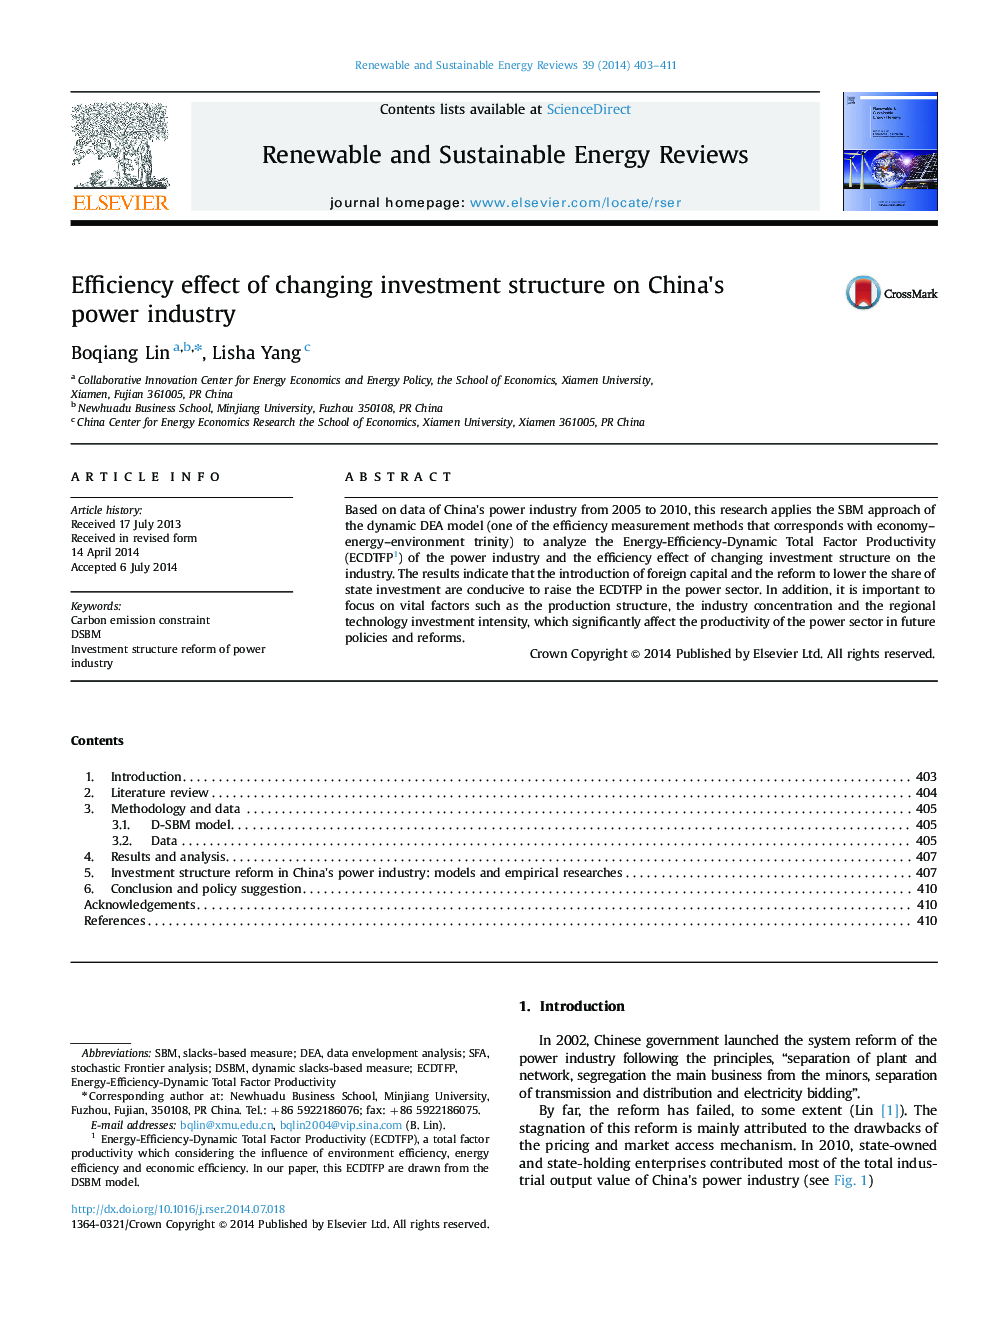 Efficiency effect of changing investment structure on China×³s power industry